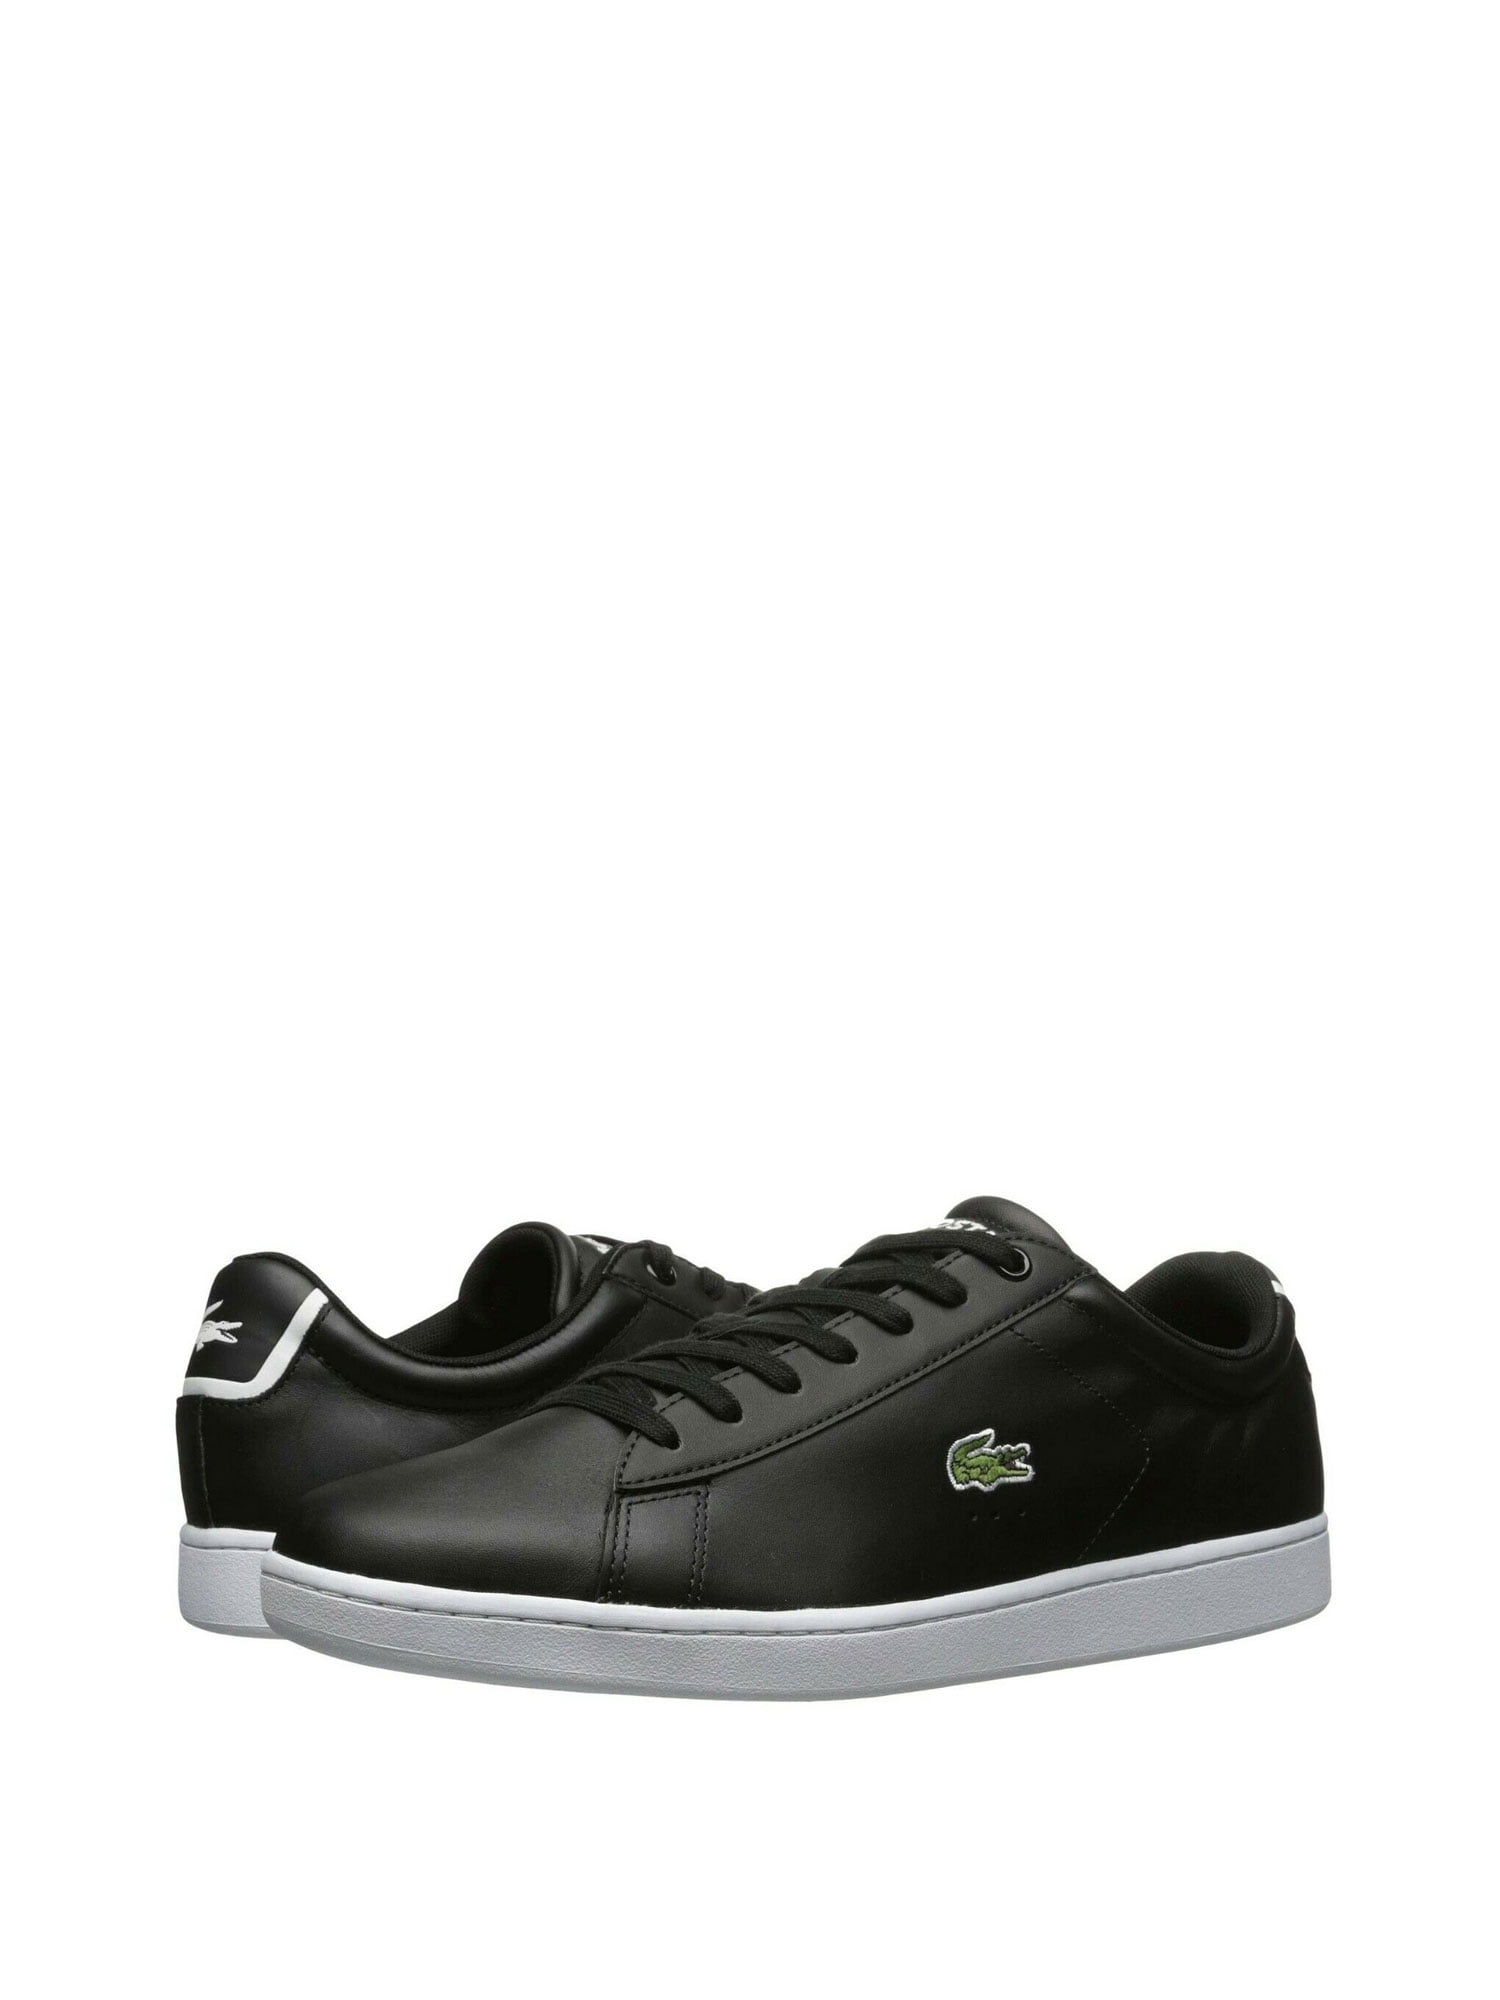 Lacoste Carnaby Evo Tennis Men's Shoes Size 